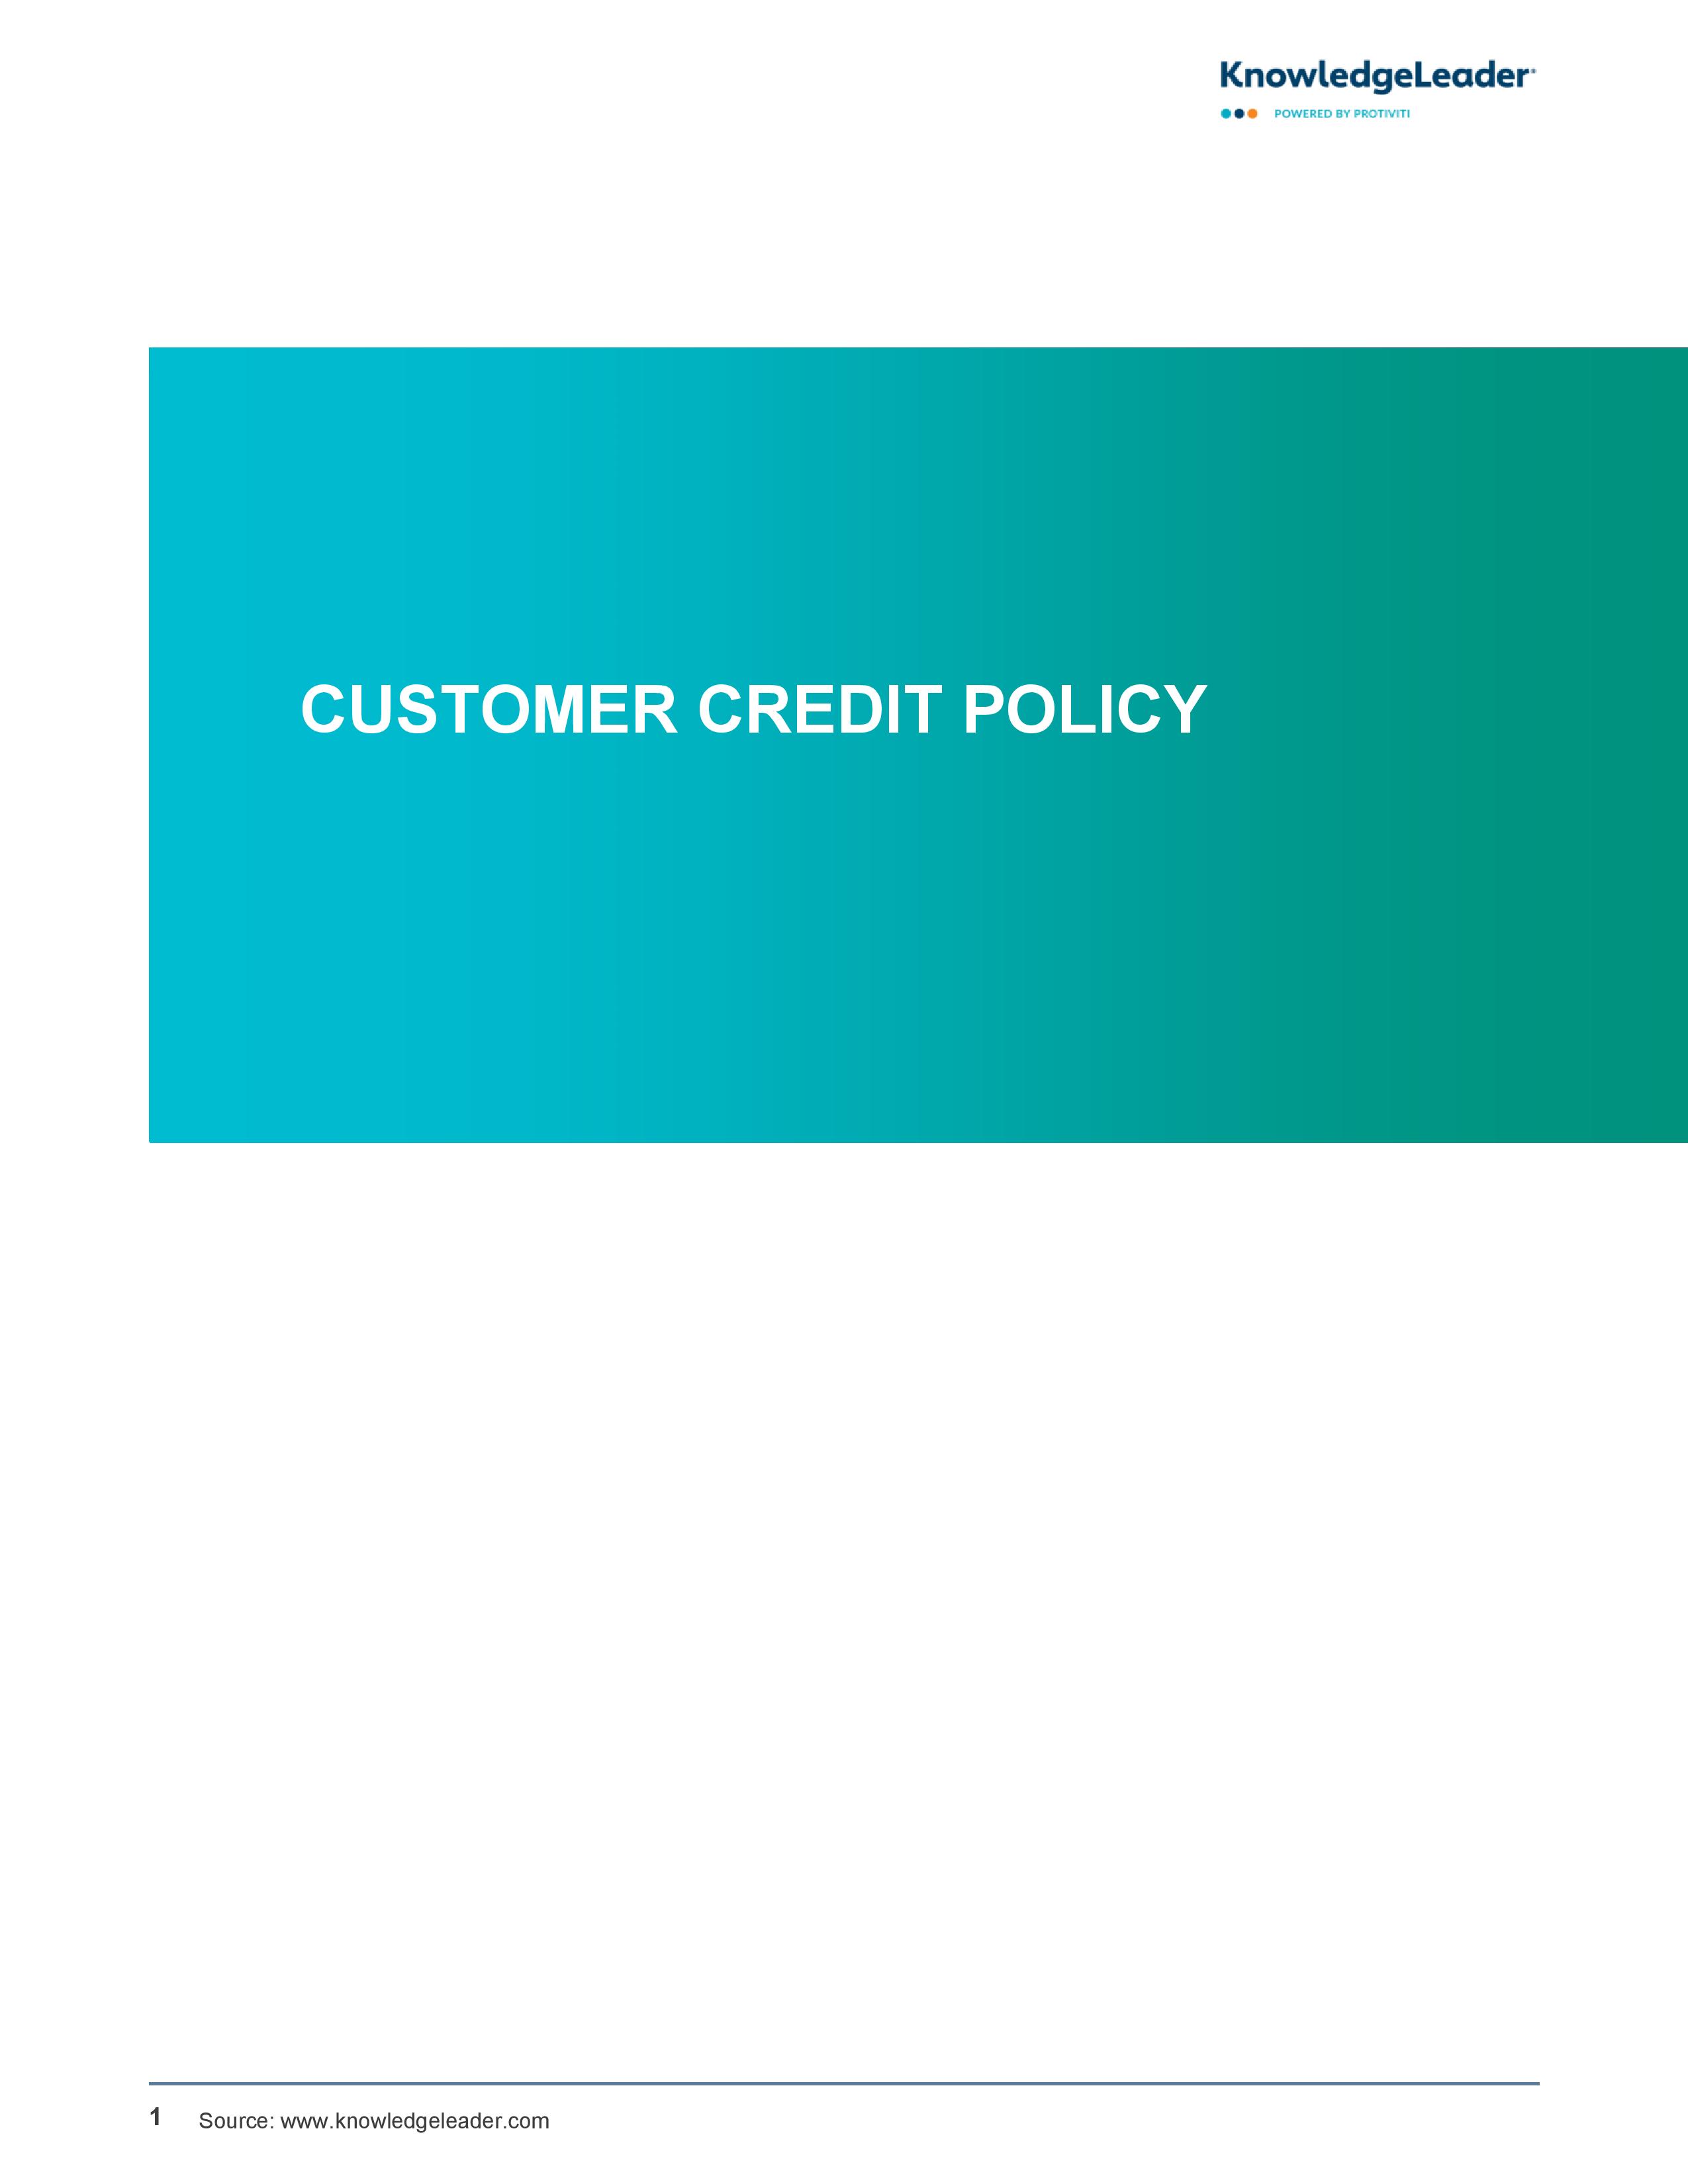 Screenshot of the first page of Customer Credit Policy